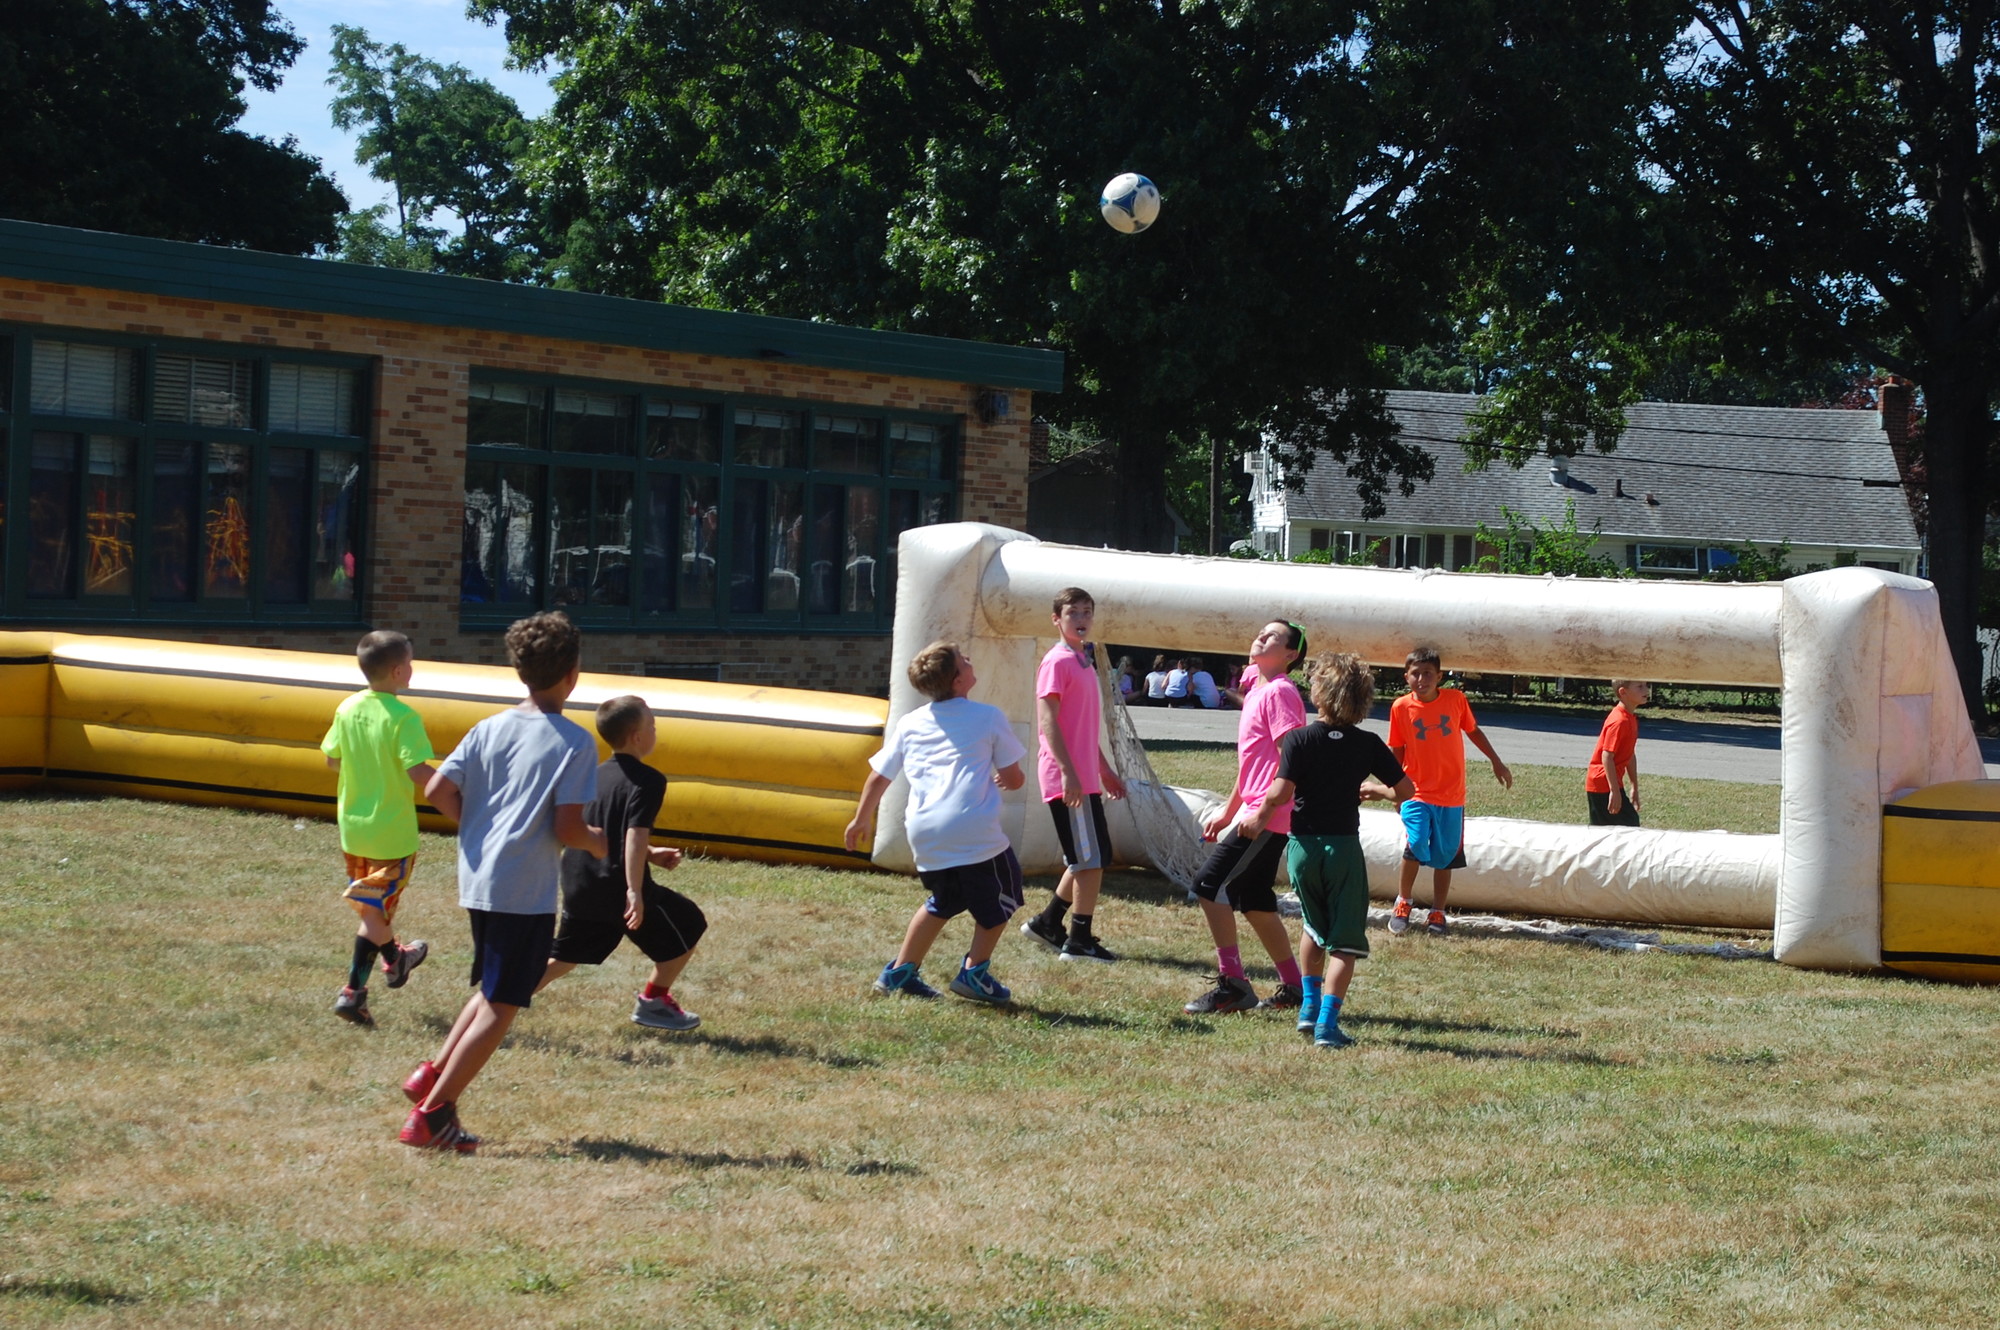 Campers played a game of soccer on a recent Thursday morning.